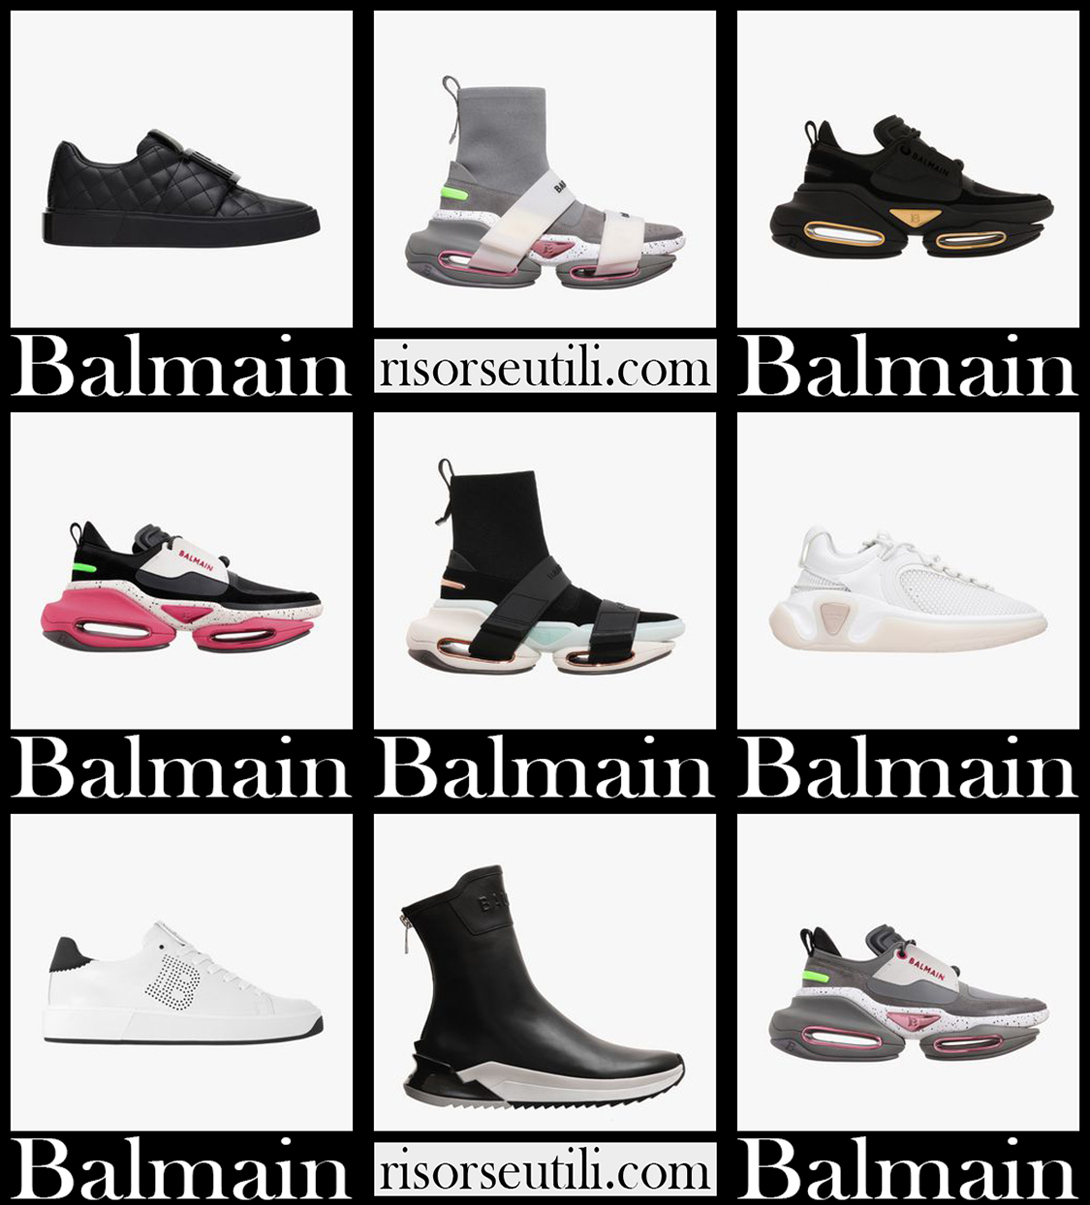 New arrivals Balmain sneakers 2021 womens shoes